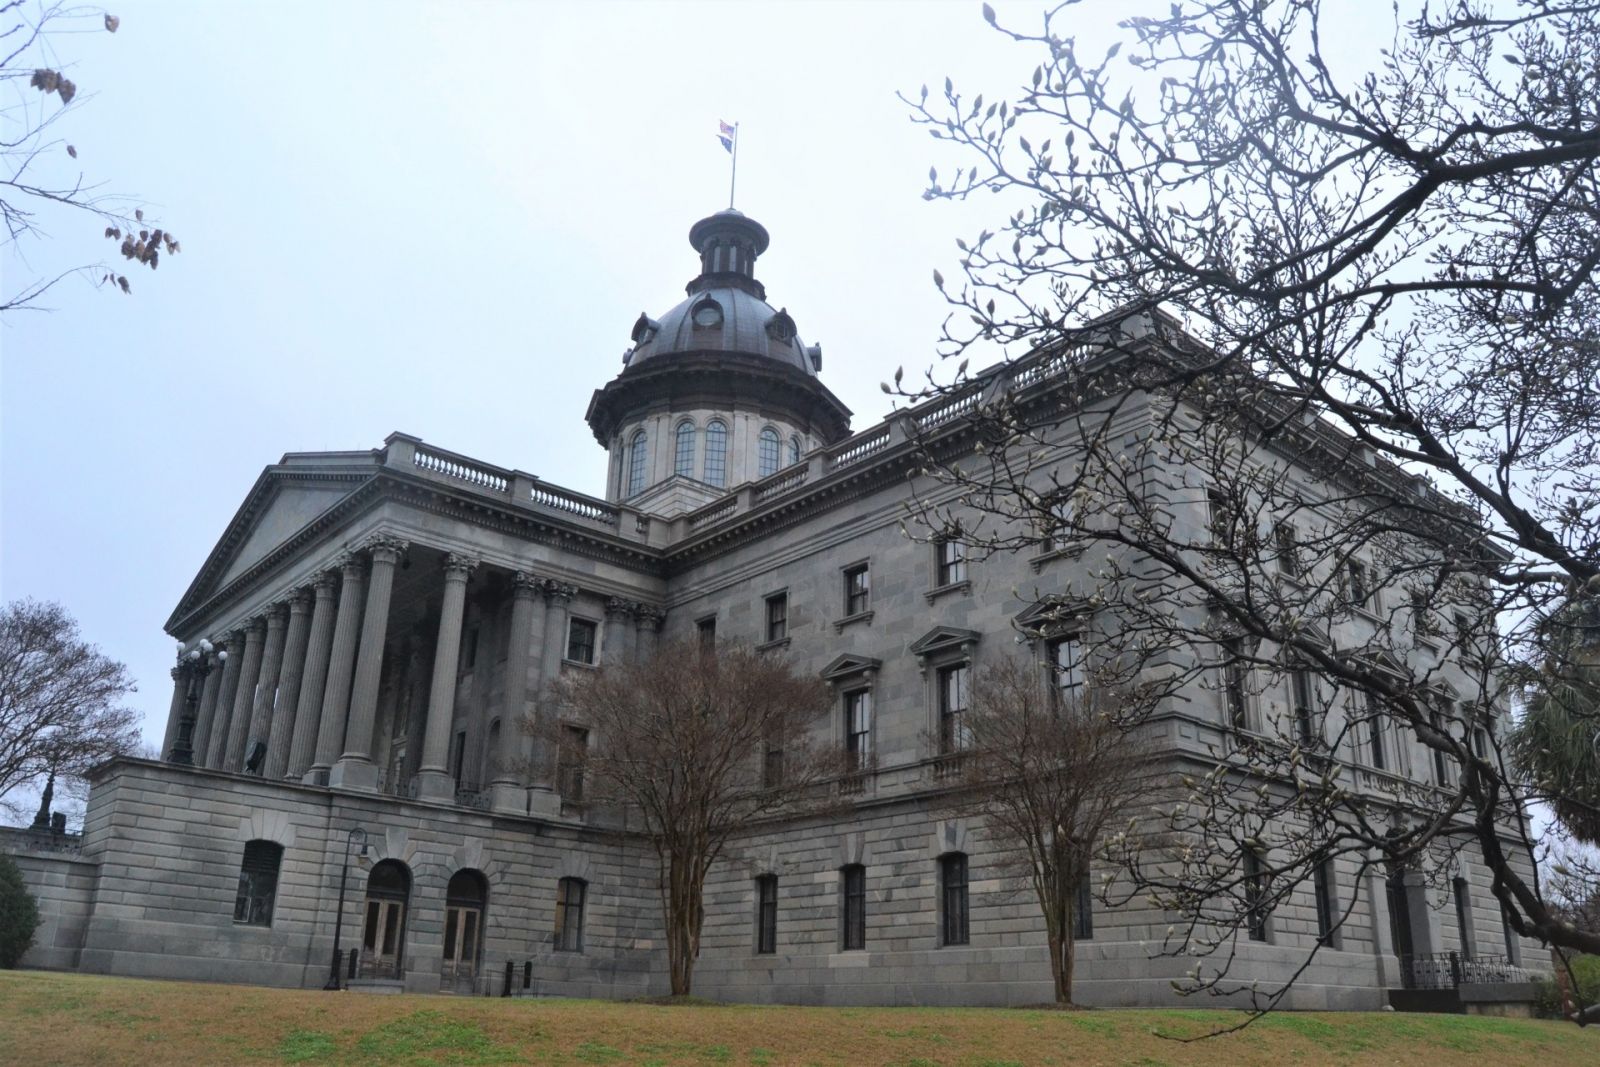 The S.C. Statehouse is one of eight pivotal locations from the Reconstruction era featured in a new history-centered tour launched by Experience Columbia SC and Historic Columbia. (Photo/Melinda Waldrop)